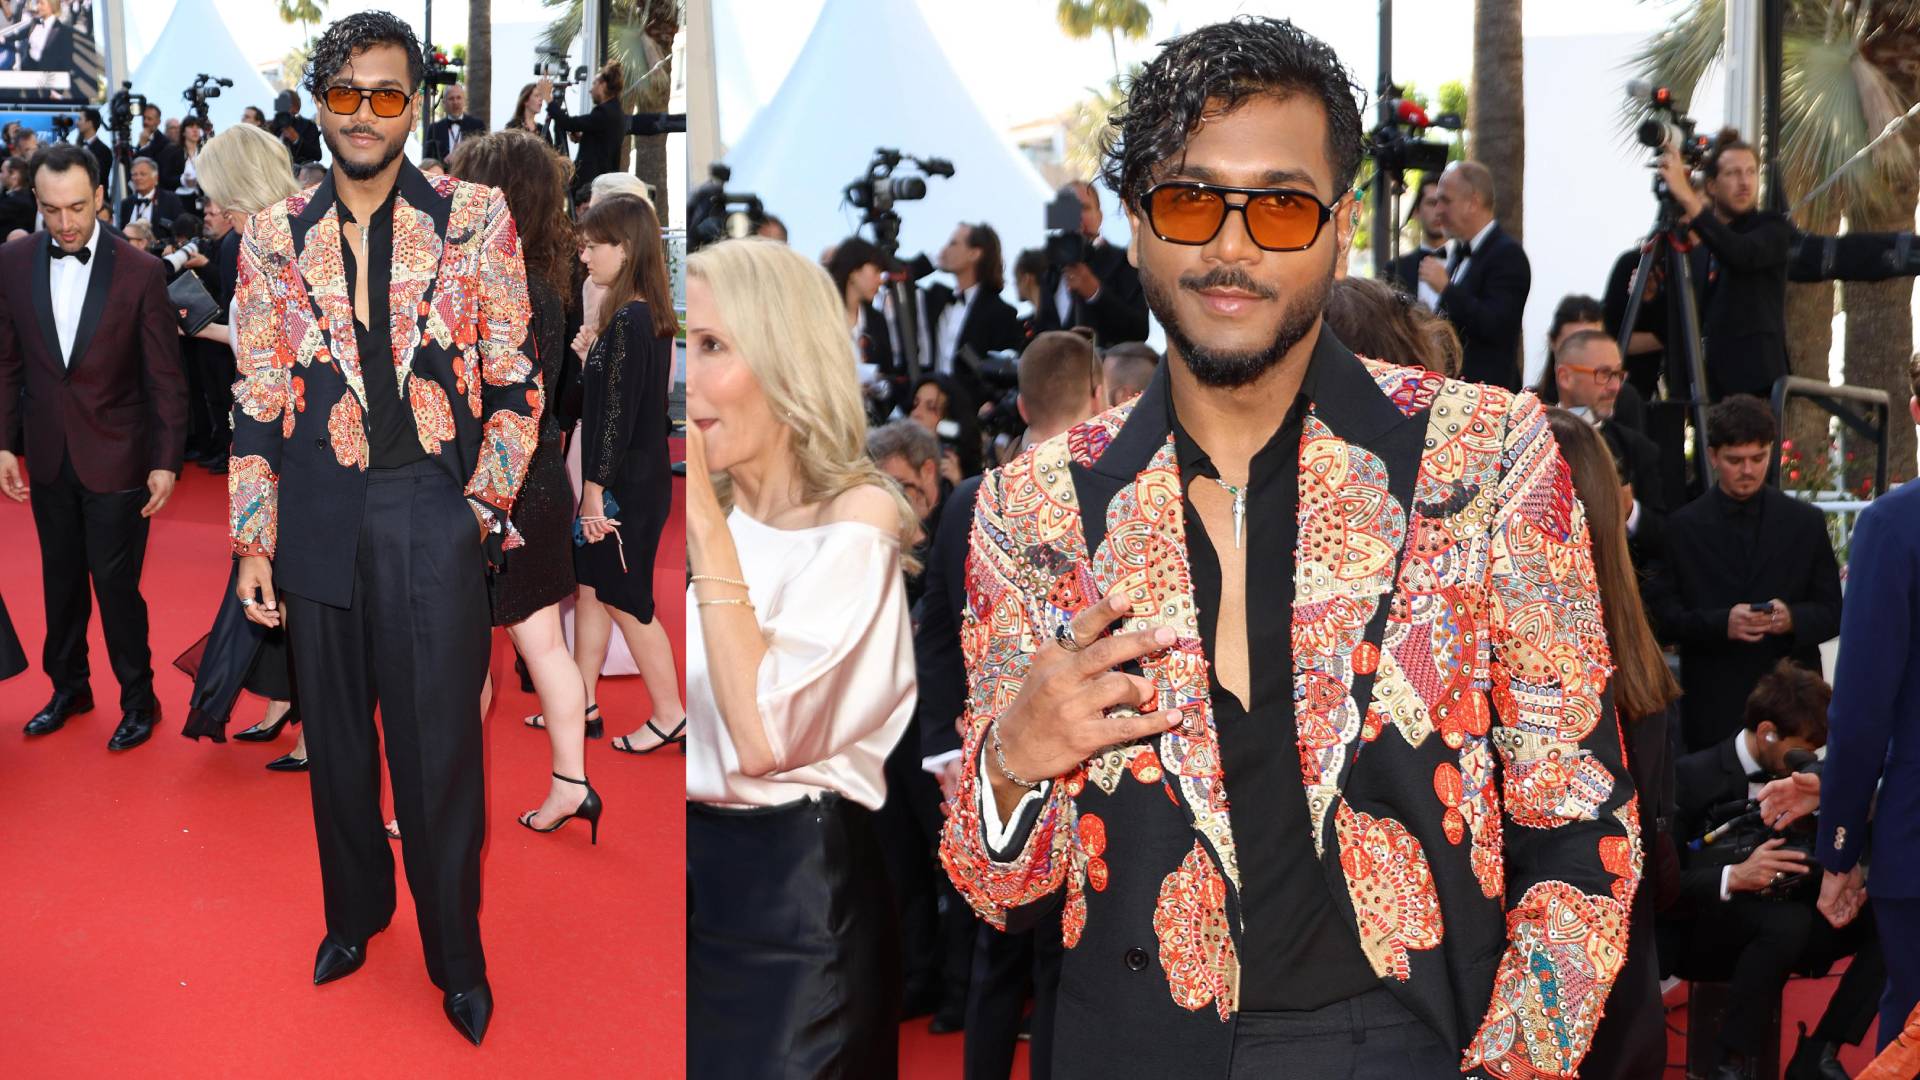 Singer King Walks The Red Carpet As The First-Ever Indian Pop Artist at Cannes Film Festival